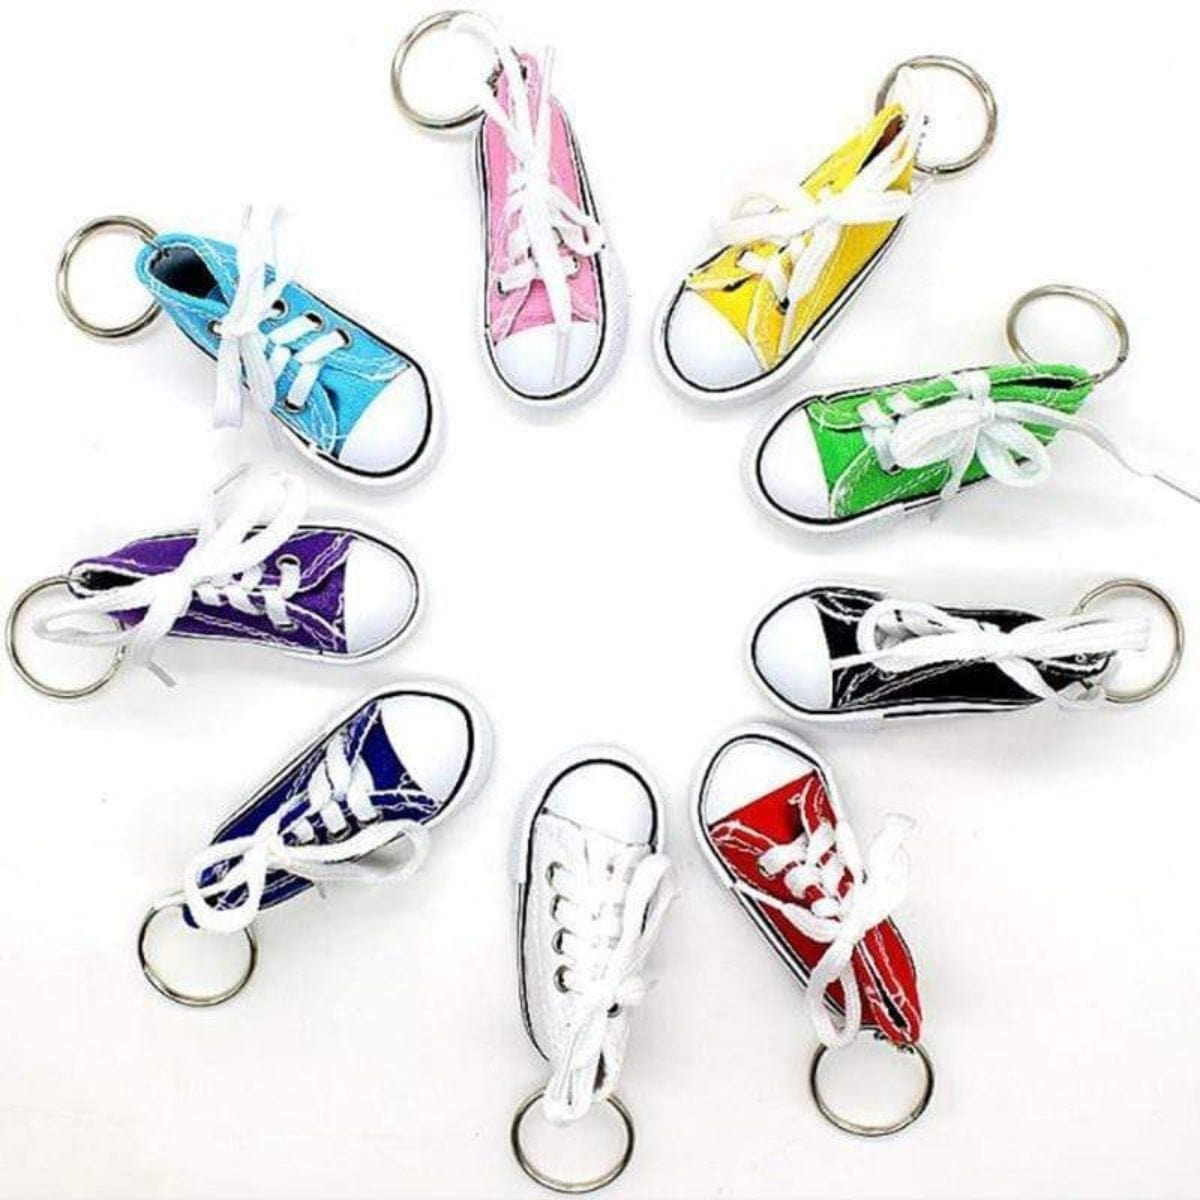 keychain-canvas-shoe-charms-red.jpg